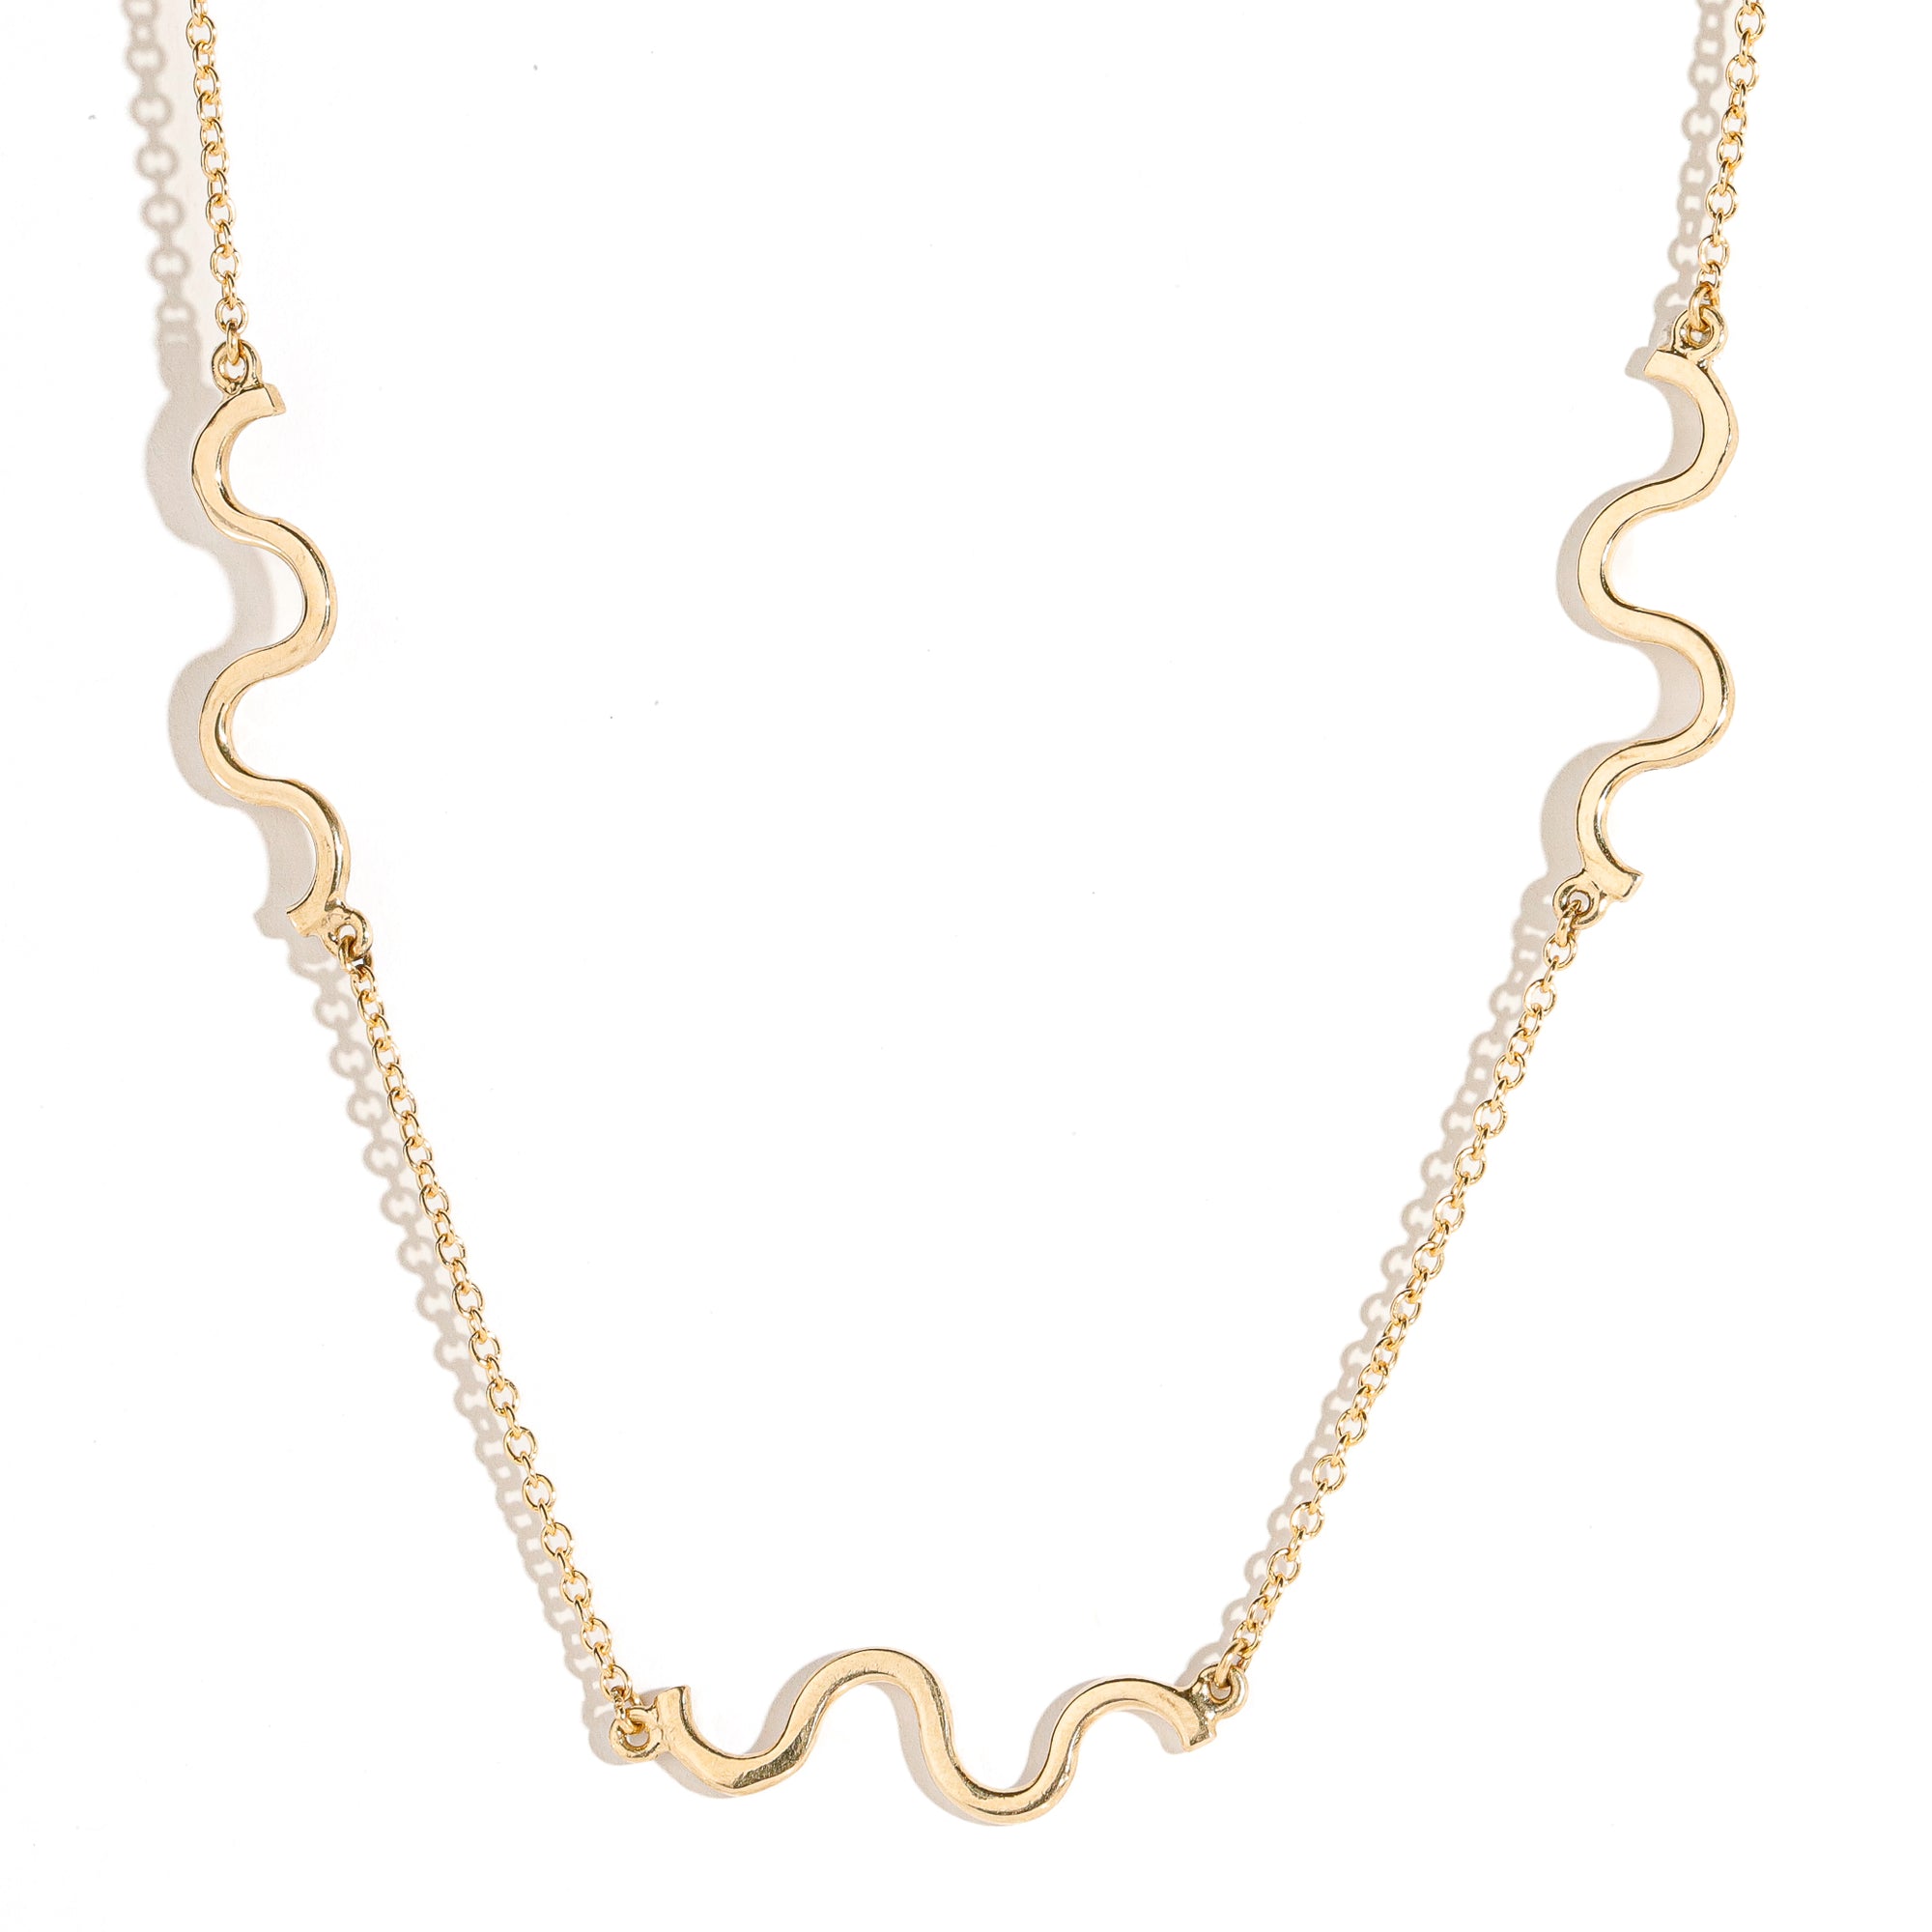 9ct gold fine chain necklace with three solid gold spiral details